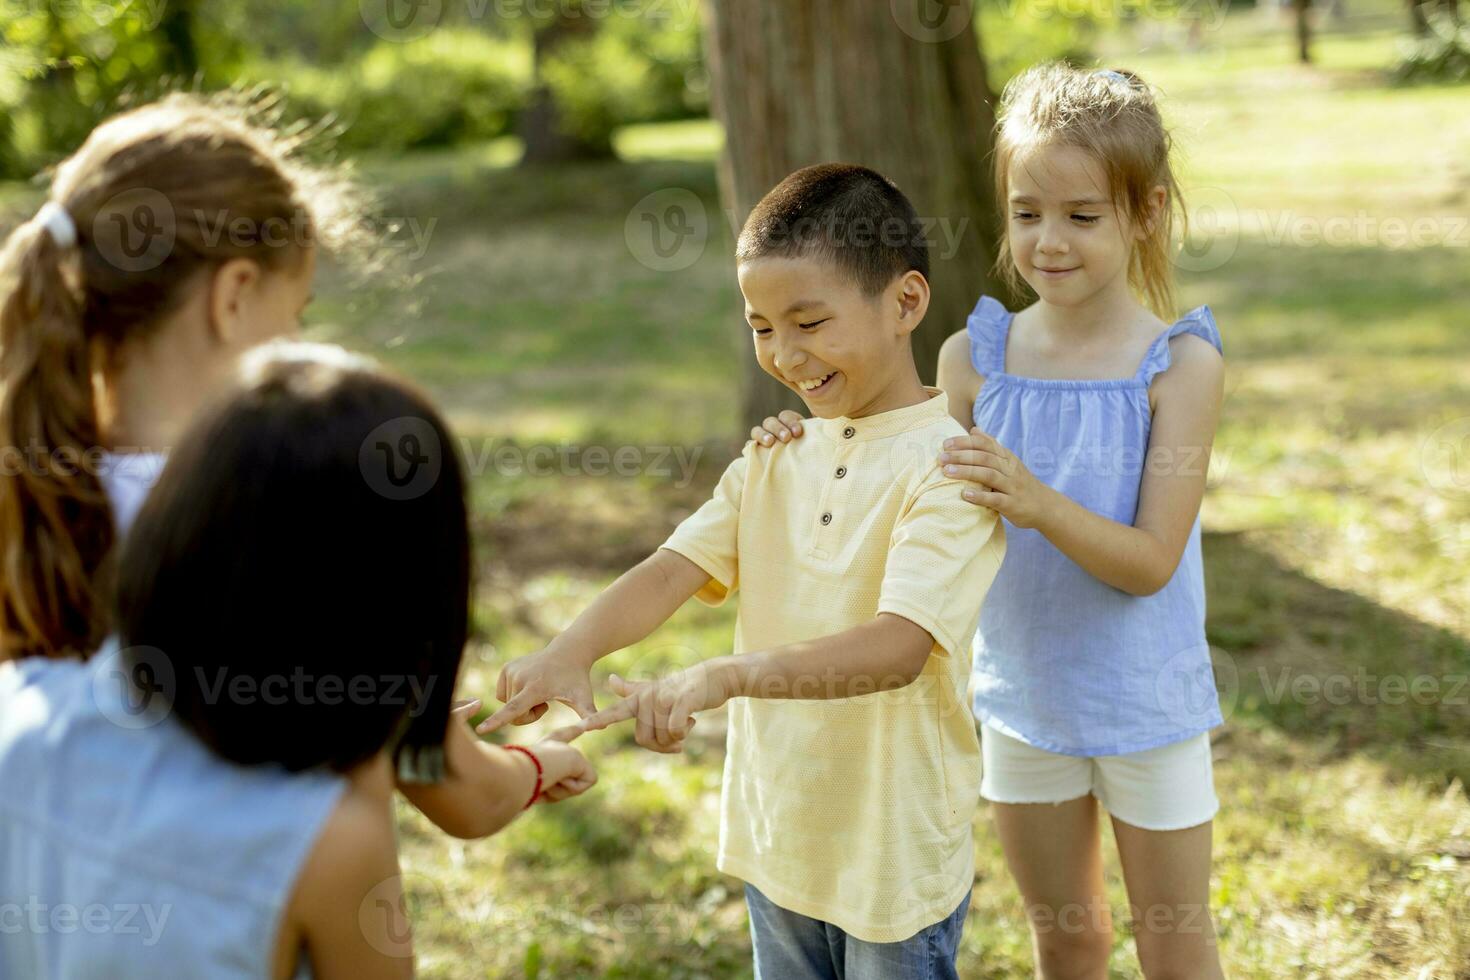 Group of asian and caucasian kids having fun in the park photo